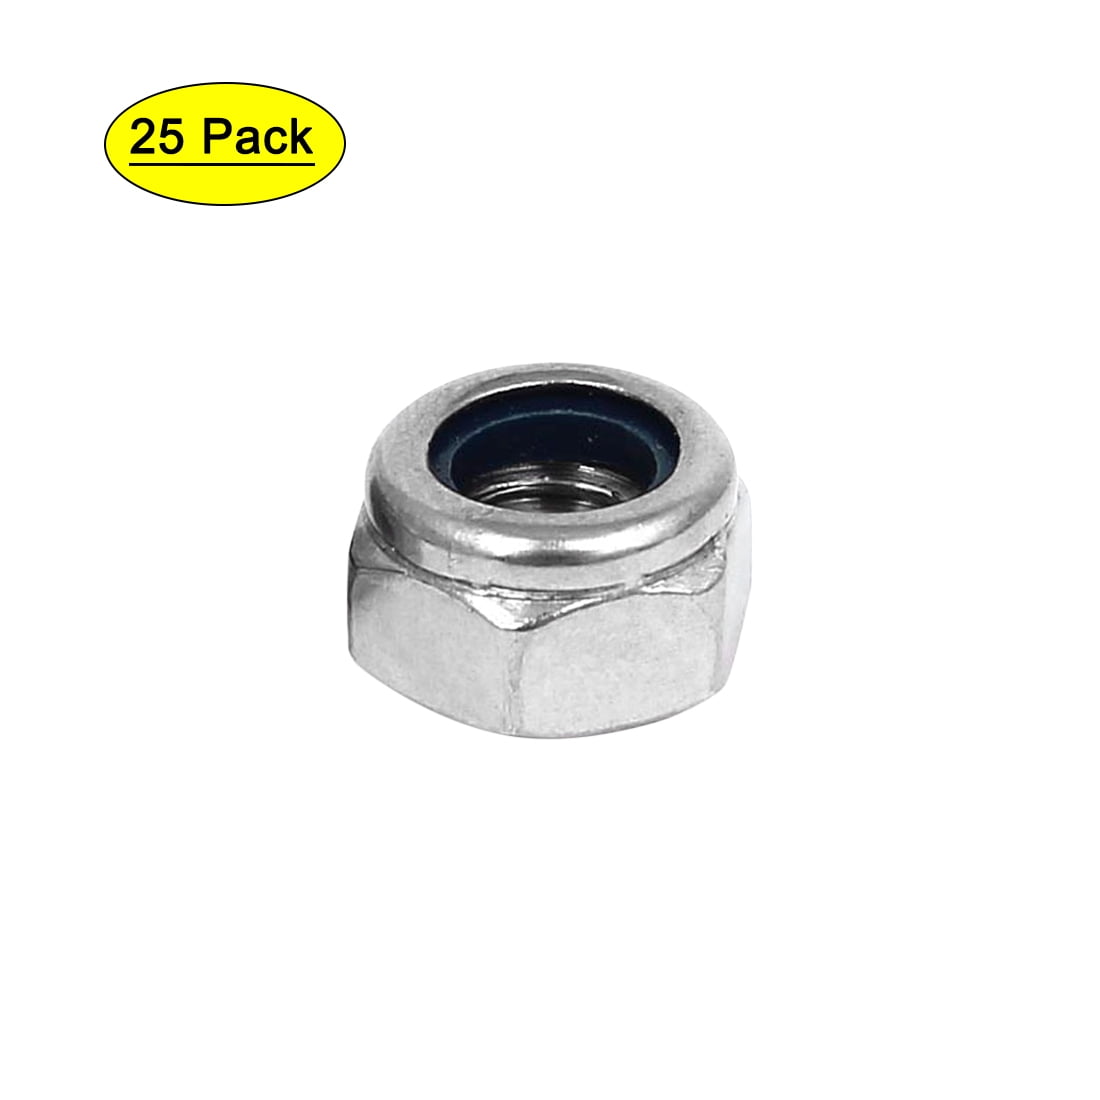 M4 x 0.7mm Nylon Insert Hex Lock Nuts Stainless Steel Lock Nut Assortment Kit for Hardware Accessories Stainless Steel Finish Hex 100PCS